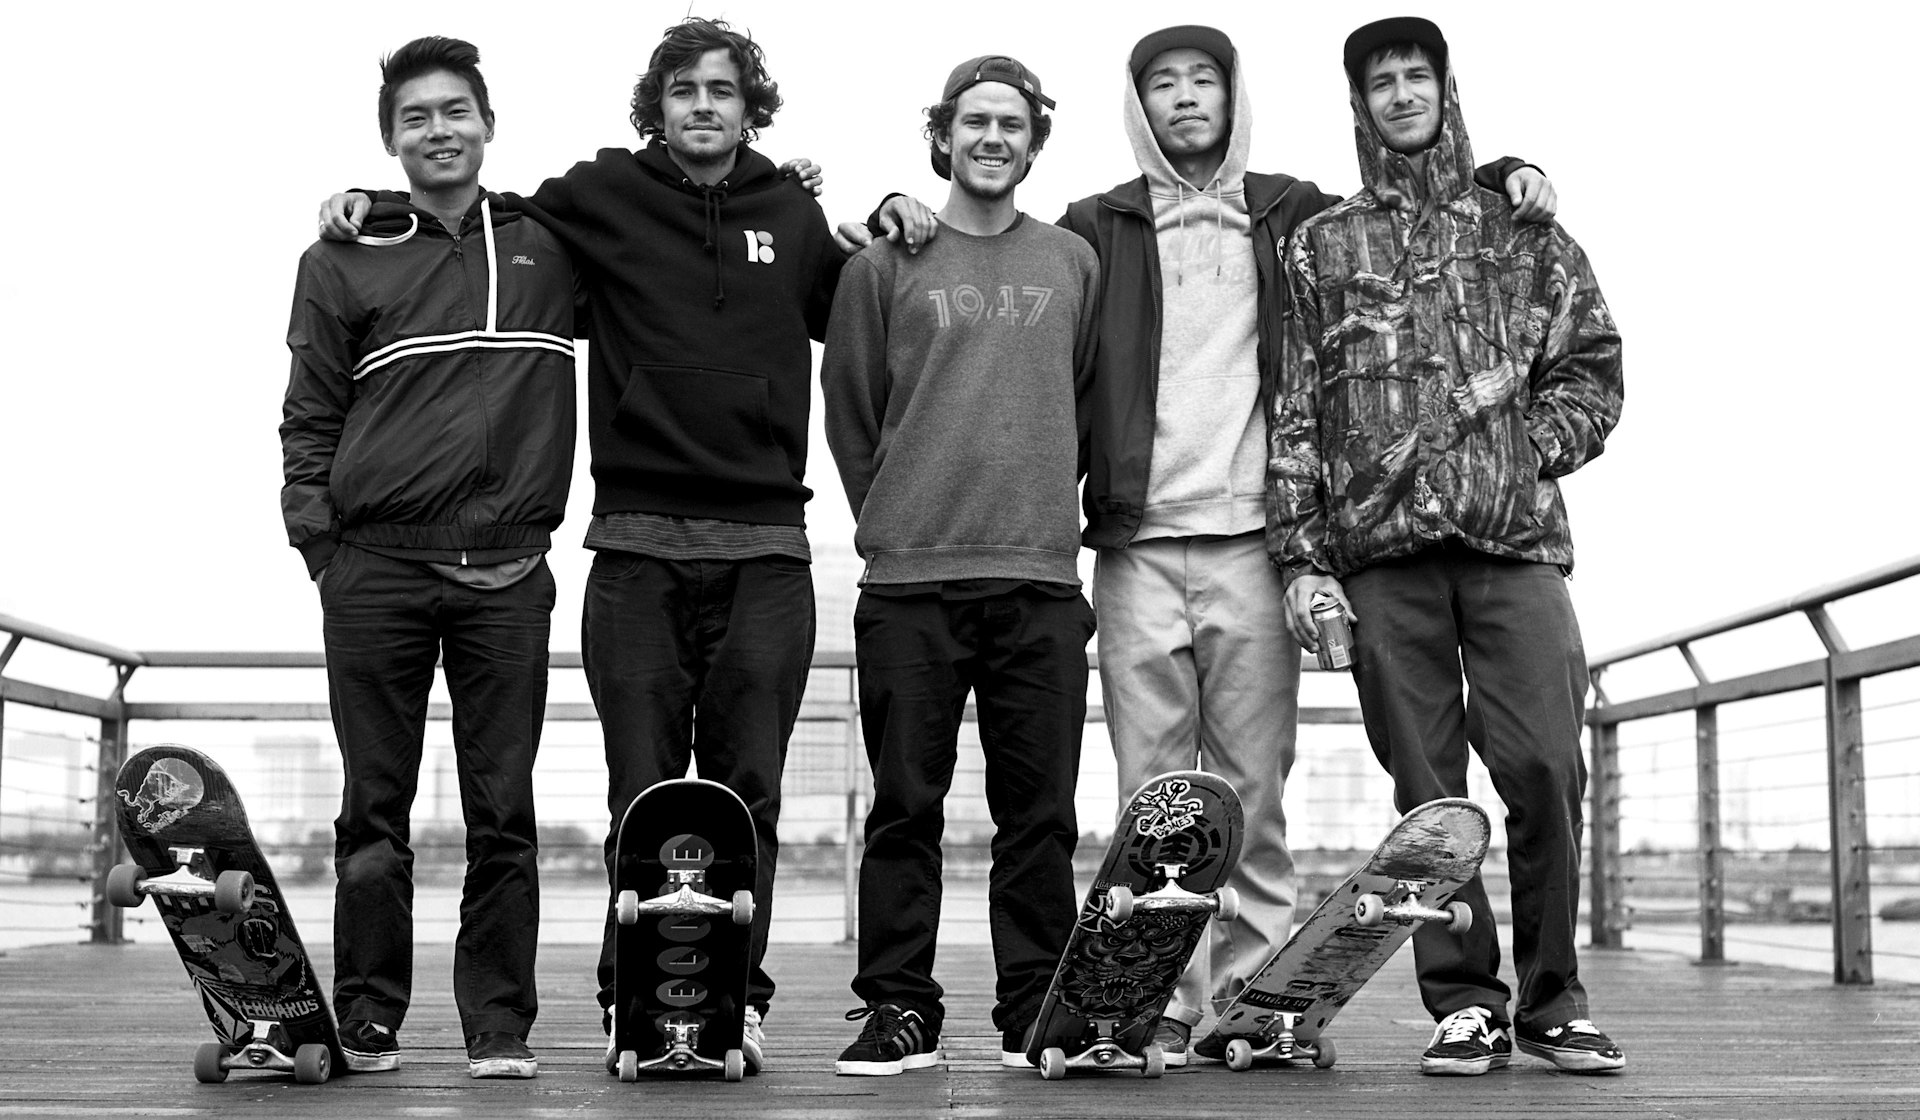 Why heavily state-controlled Shanghai is one of the world's most liberating places to skate